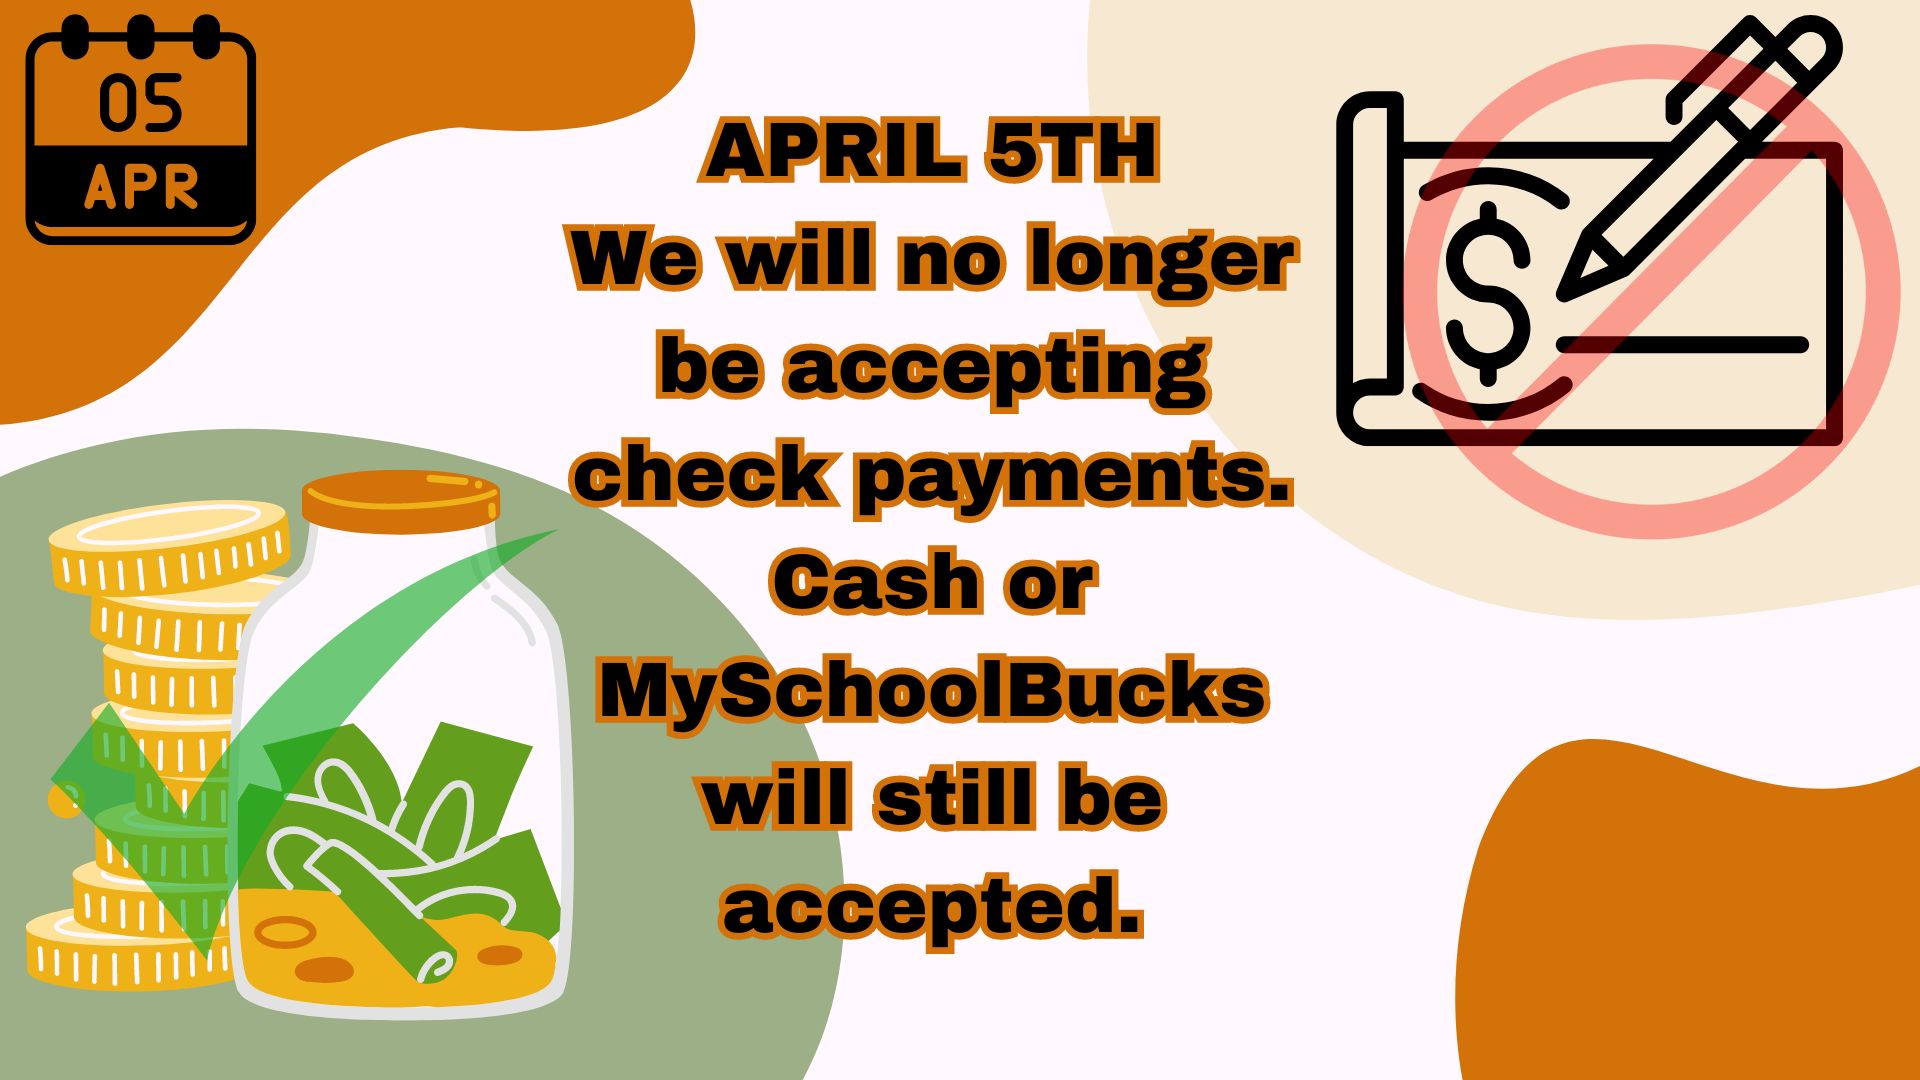 After April 5, we will not be accepting checks. Cash or Myschoolbucks payments will still be accepted